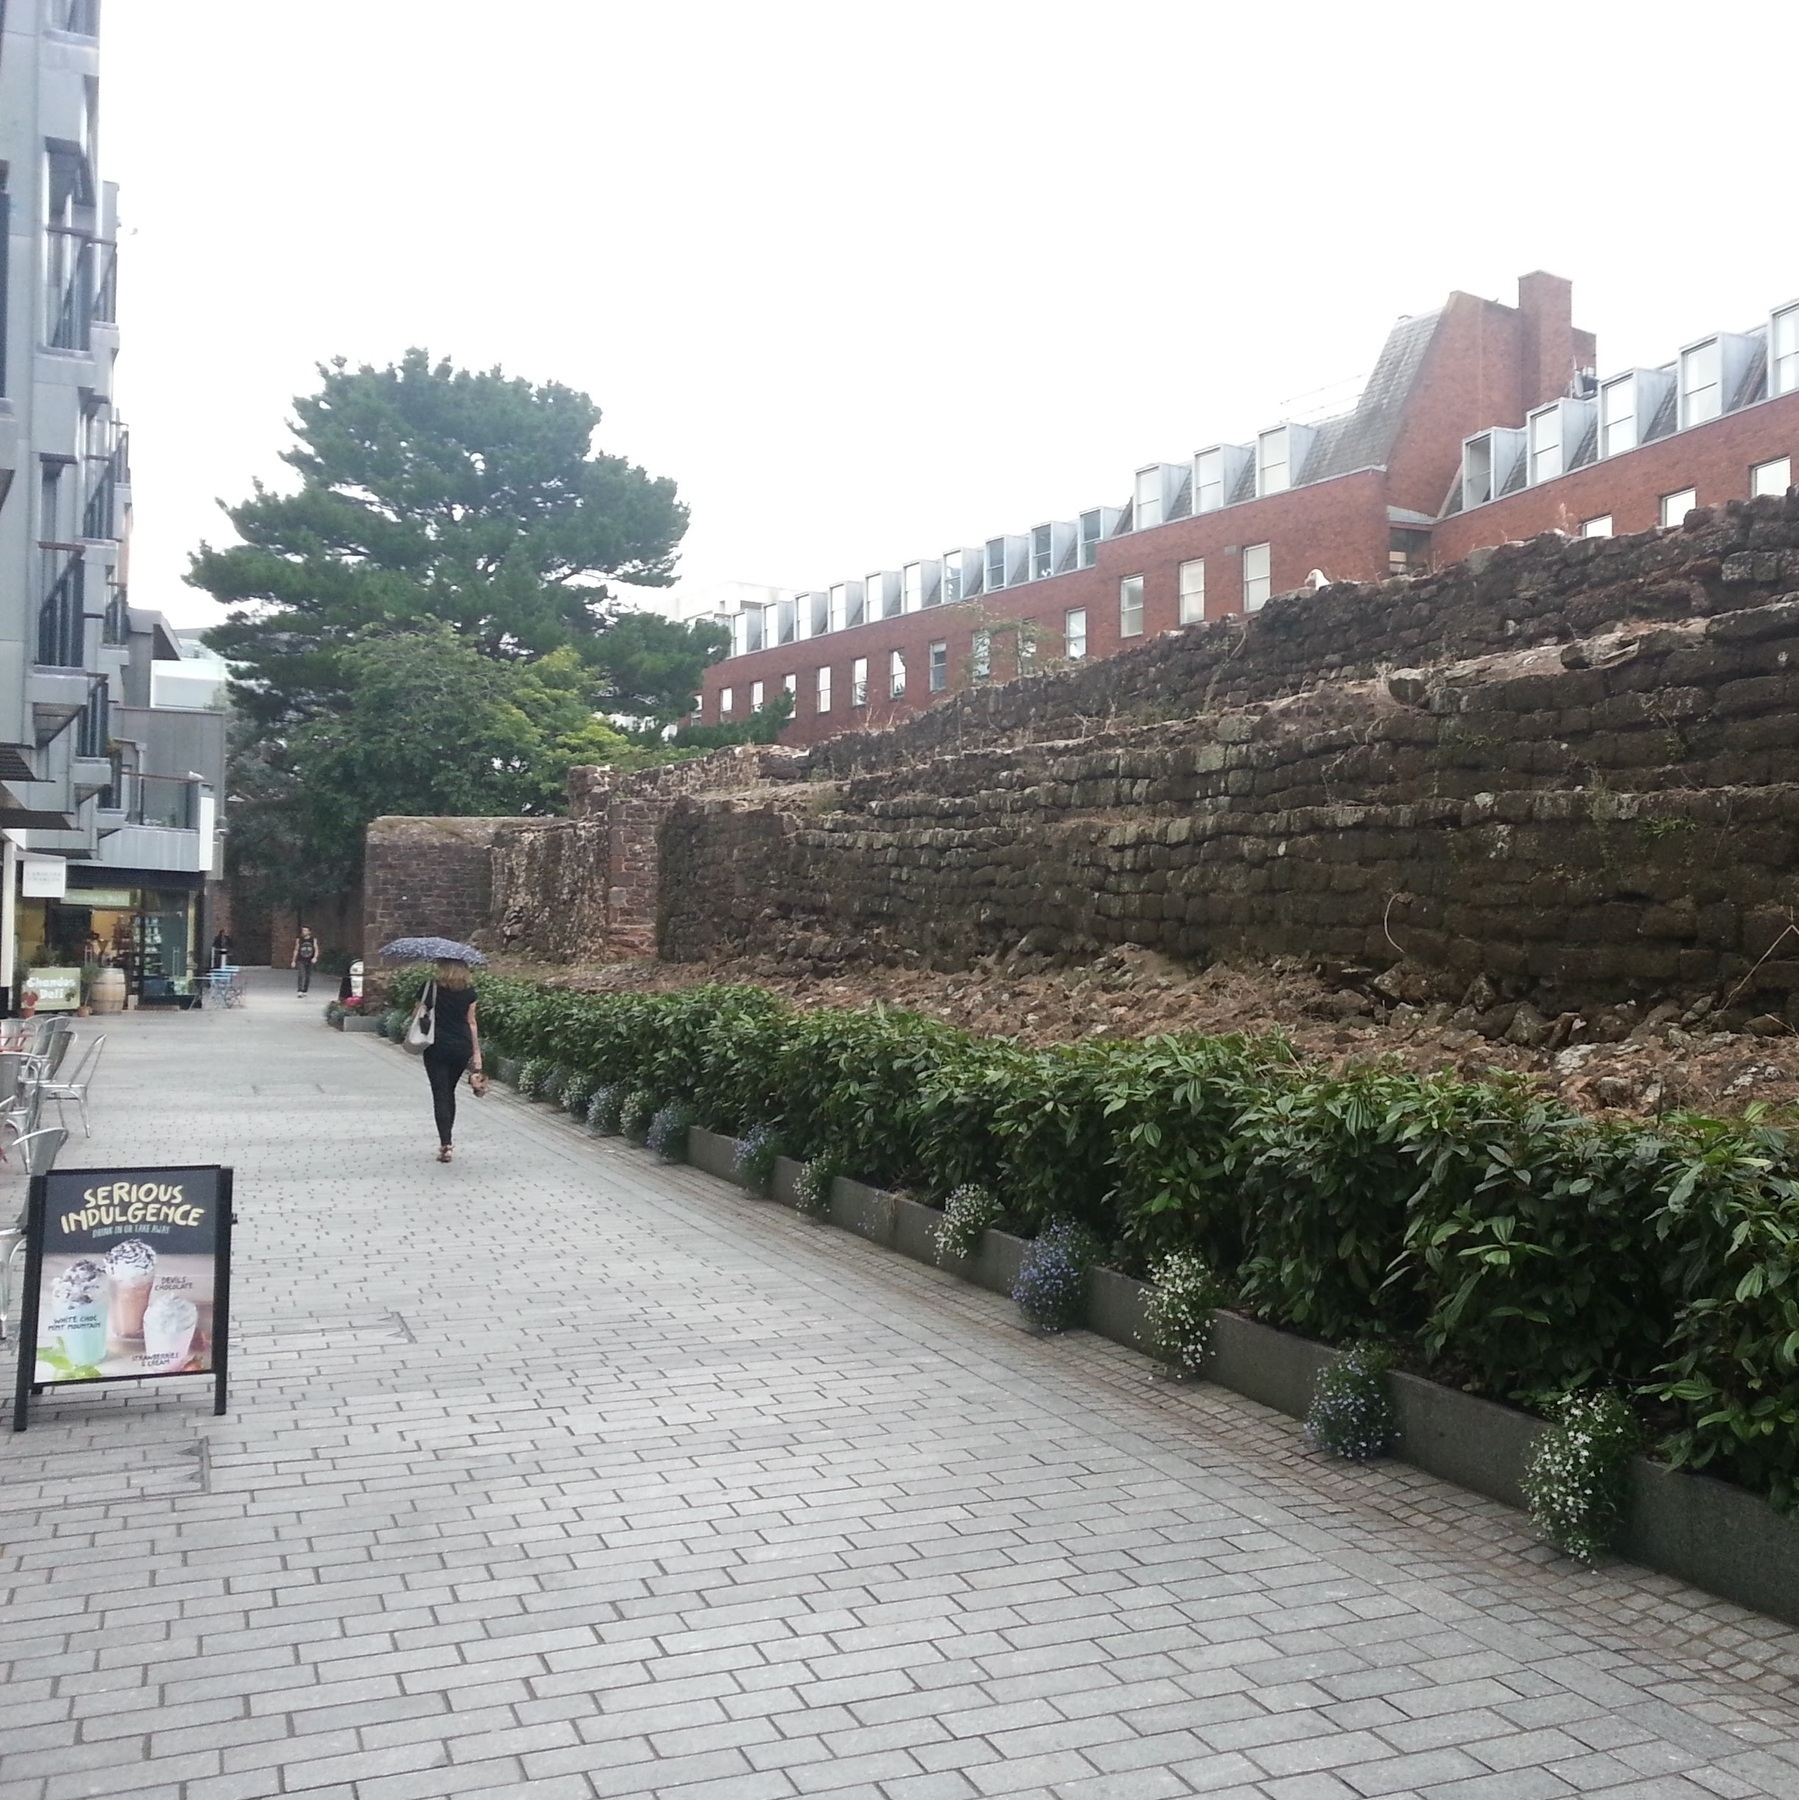 A Roman wall beside a modern footpath within Exeter.